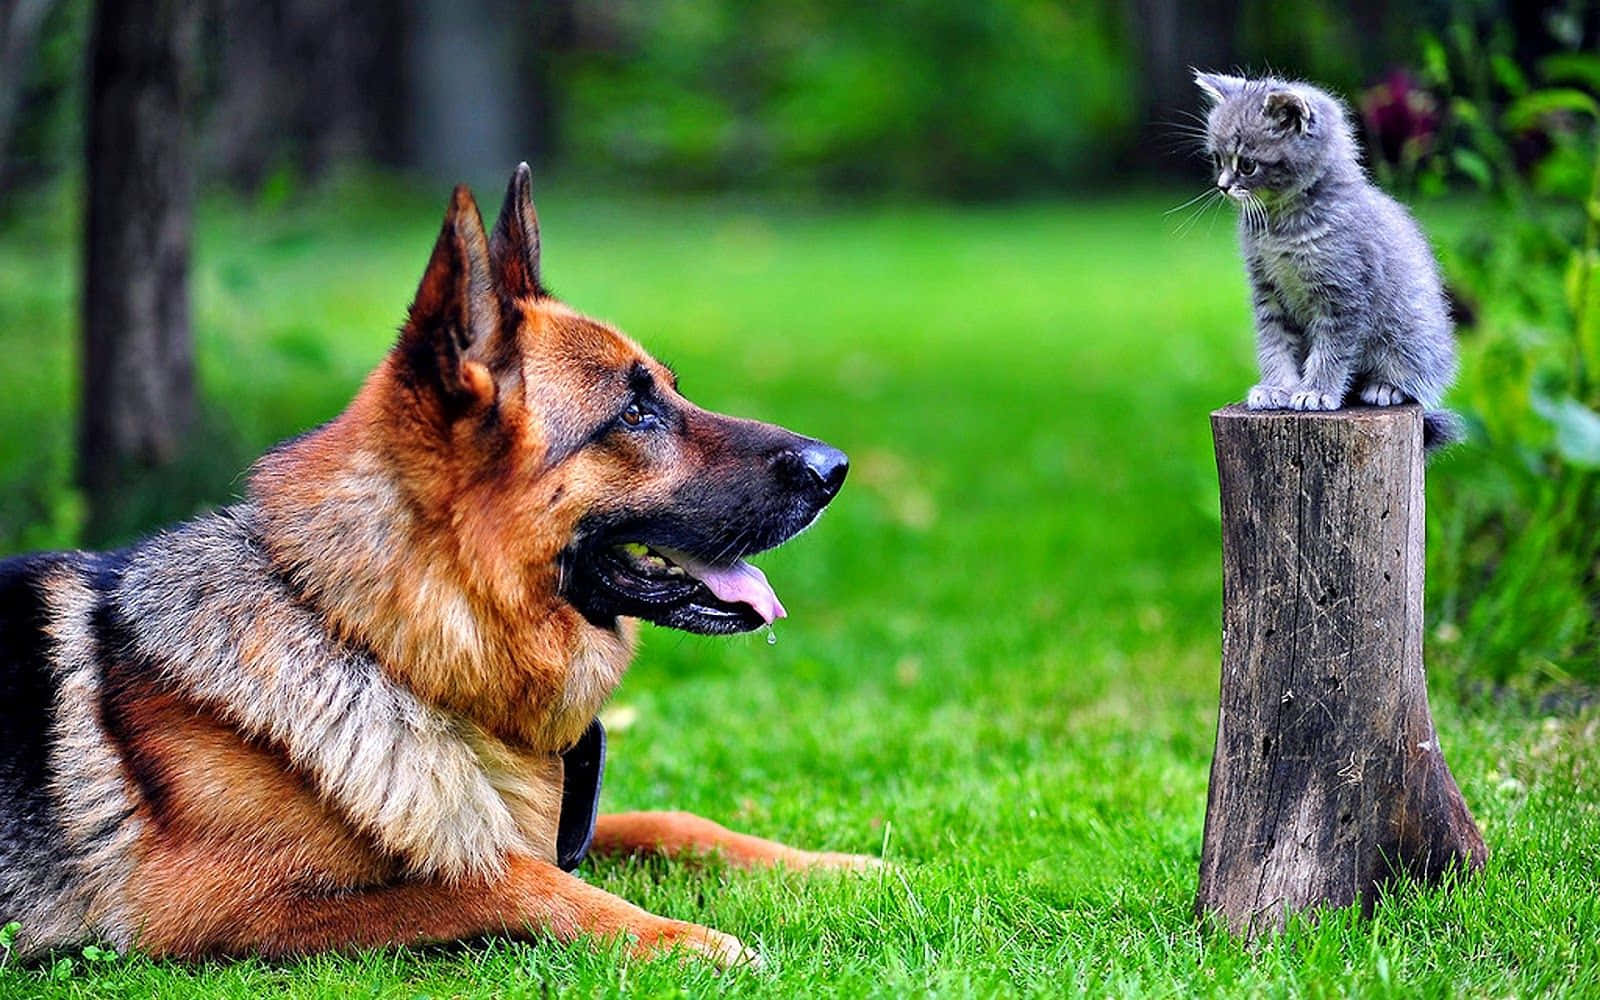 "Unforgettable Moments: A Hilarious Cat and Dog Duo"